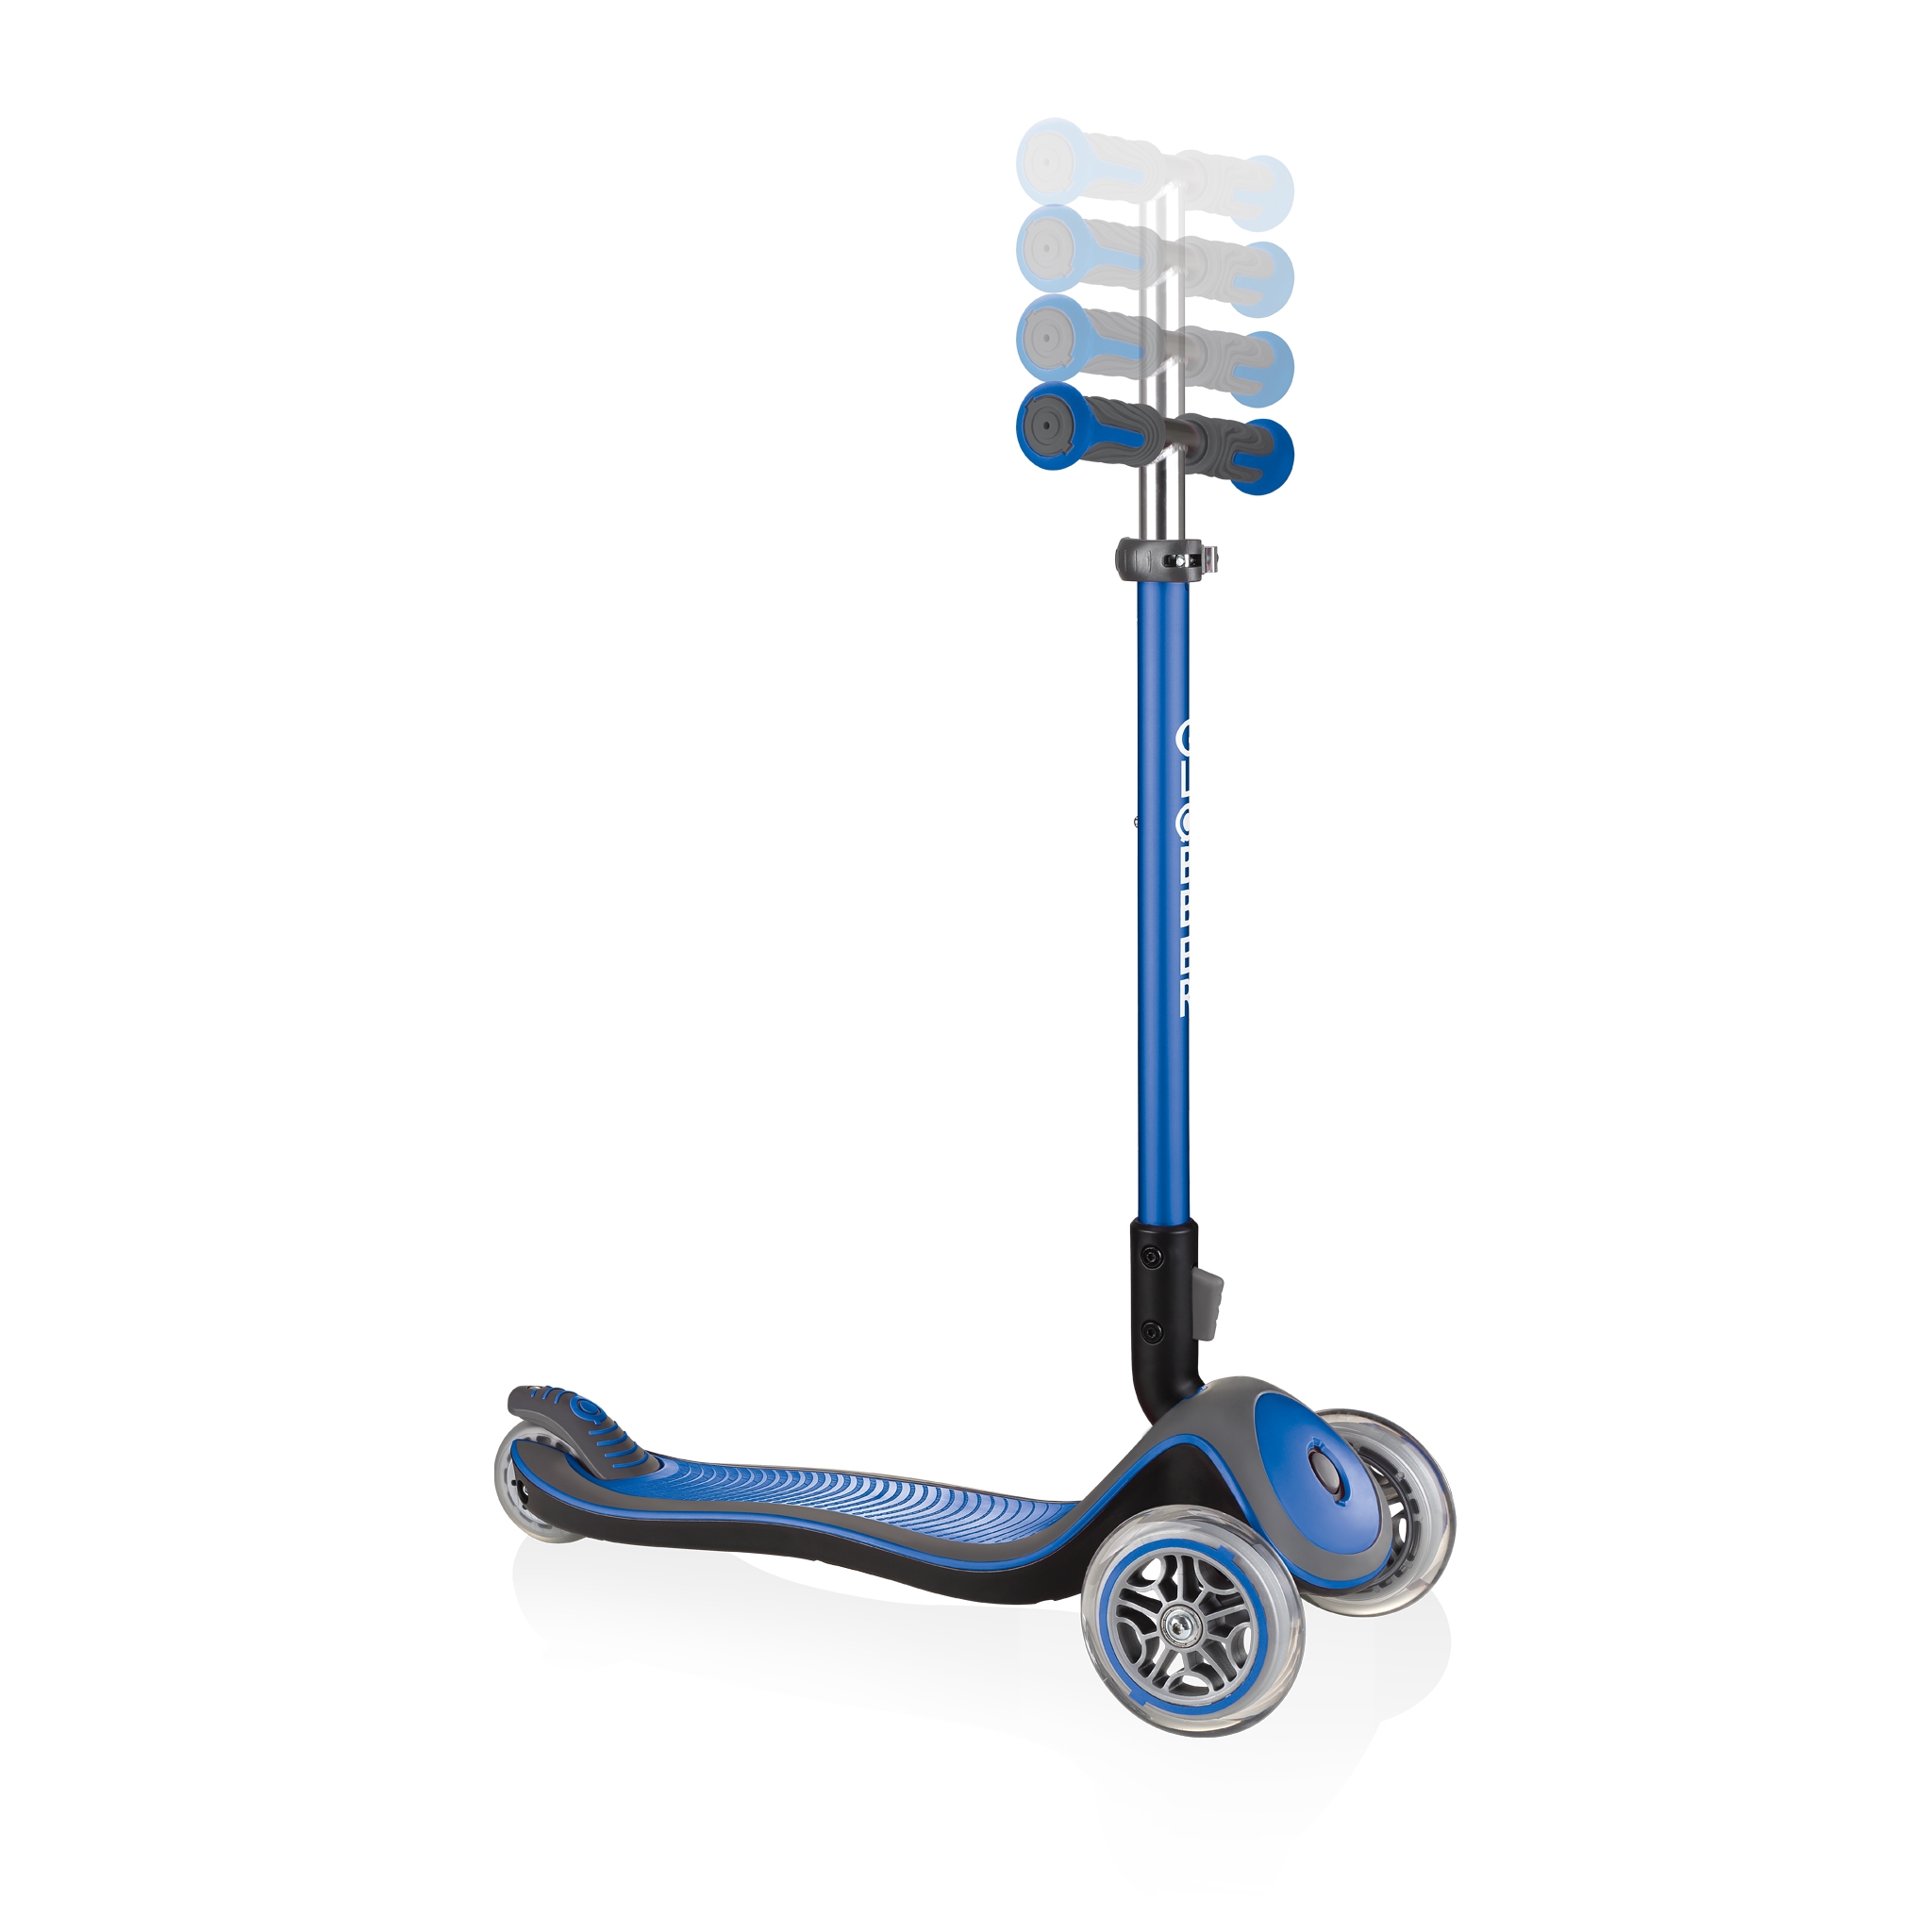 Globber-ELITE-DELUXE-3-wheel-adjustable-scooter-for-kids-with-anodized-T-bar-navy-blue 1